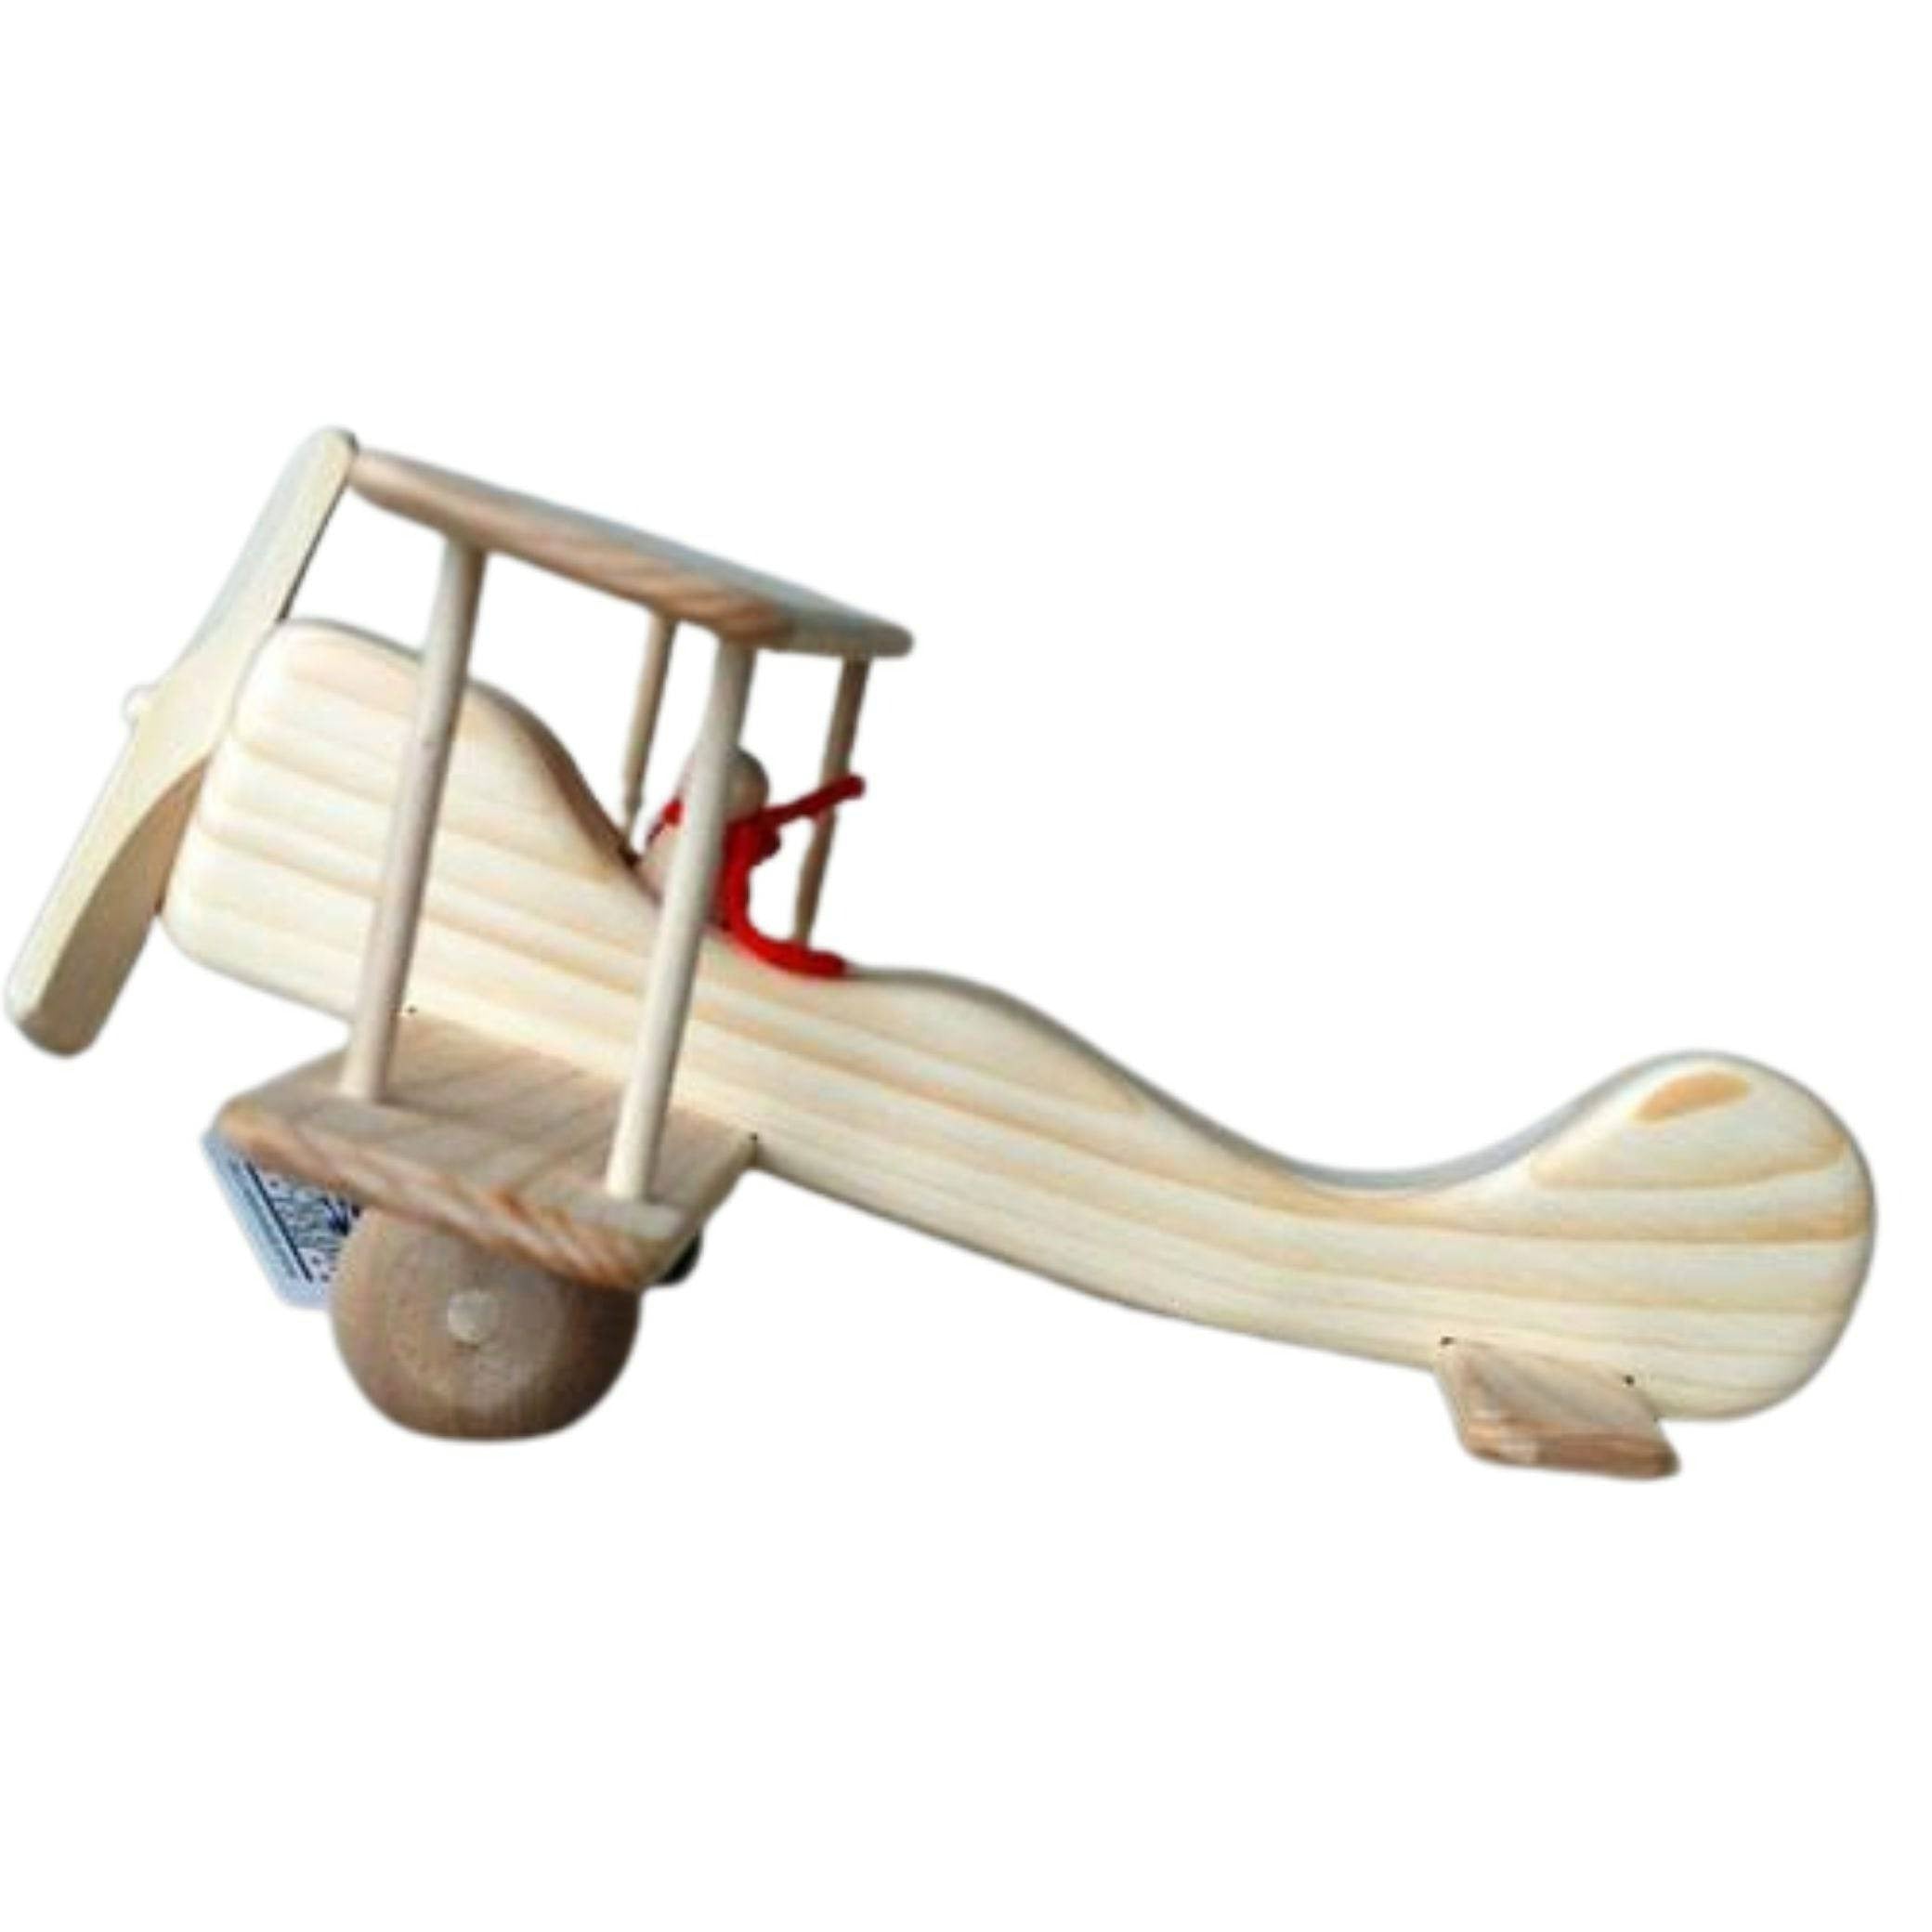 12pcs Wooden Plane Infant Toys Set Wooden Toy Airplane Helicopter Baby Wooden 